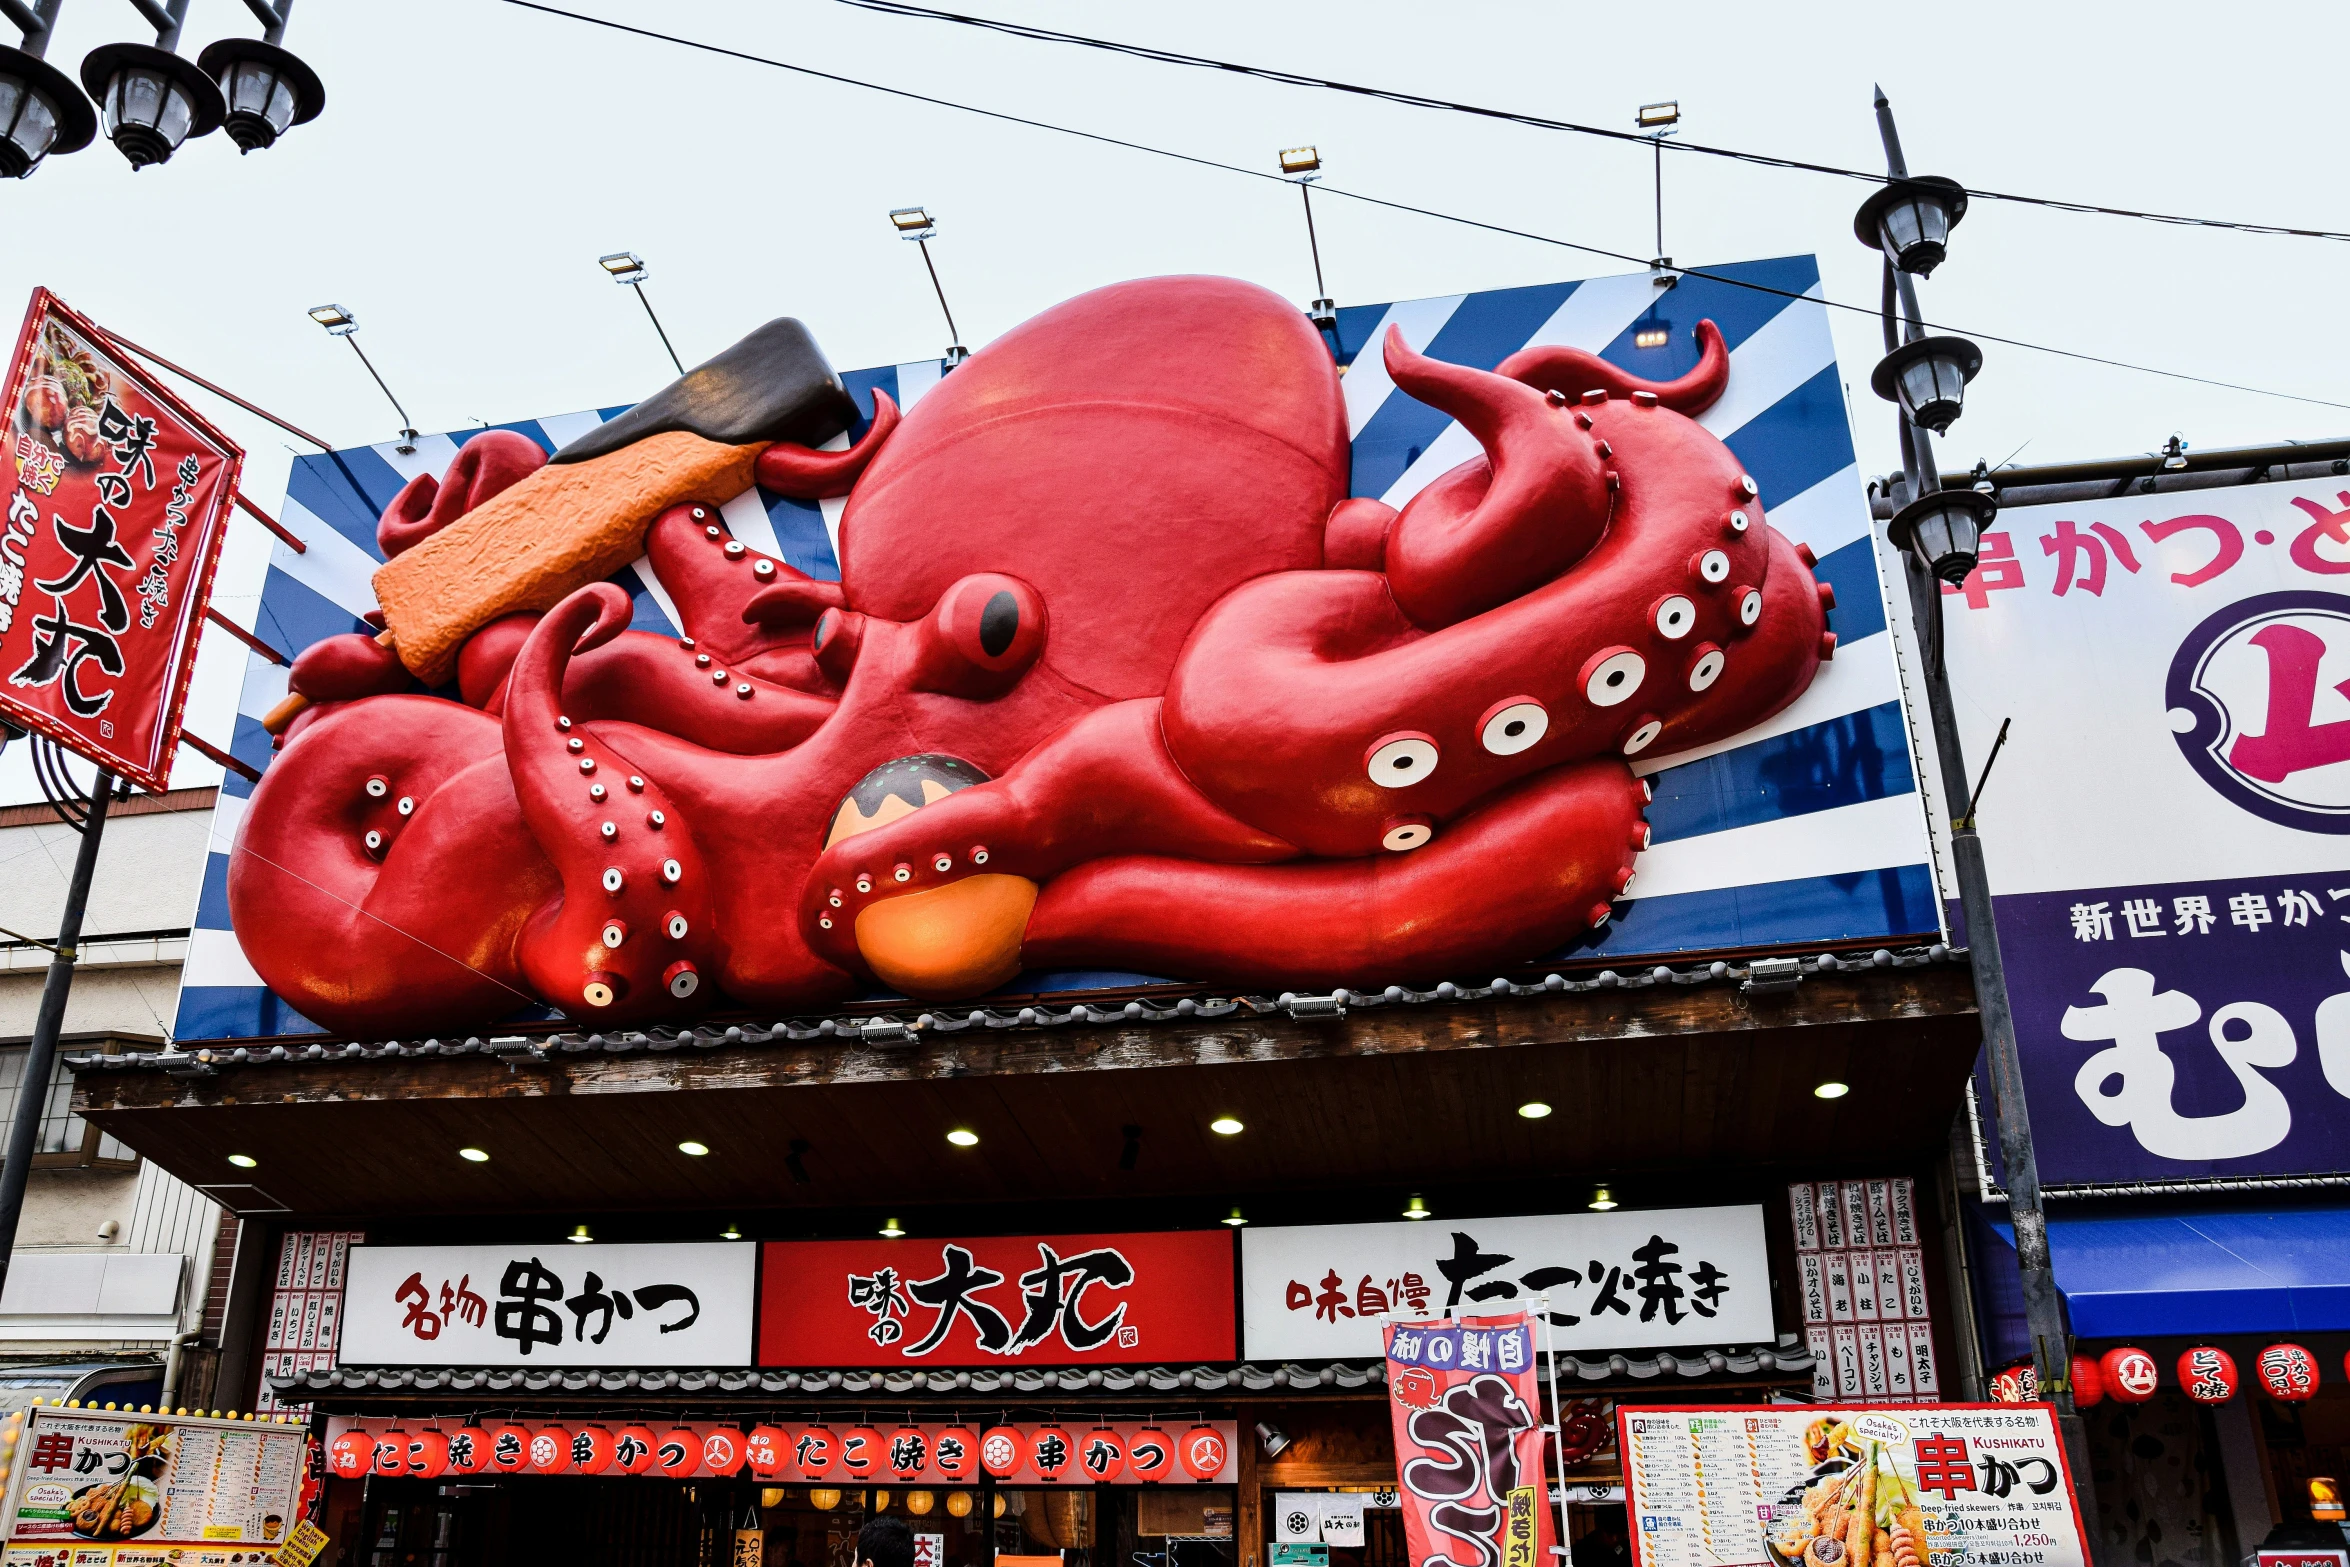 a giant colorful octo is shown on the side of a store